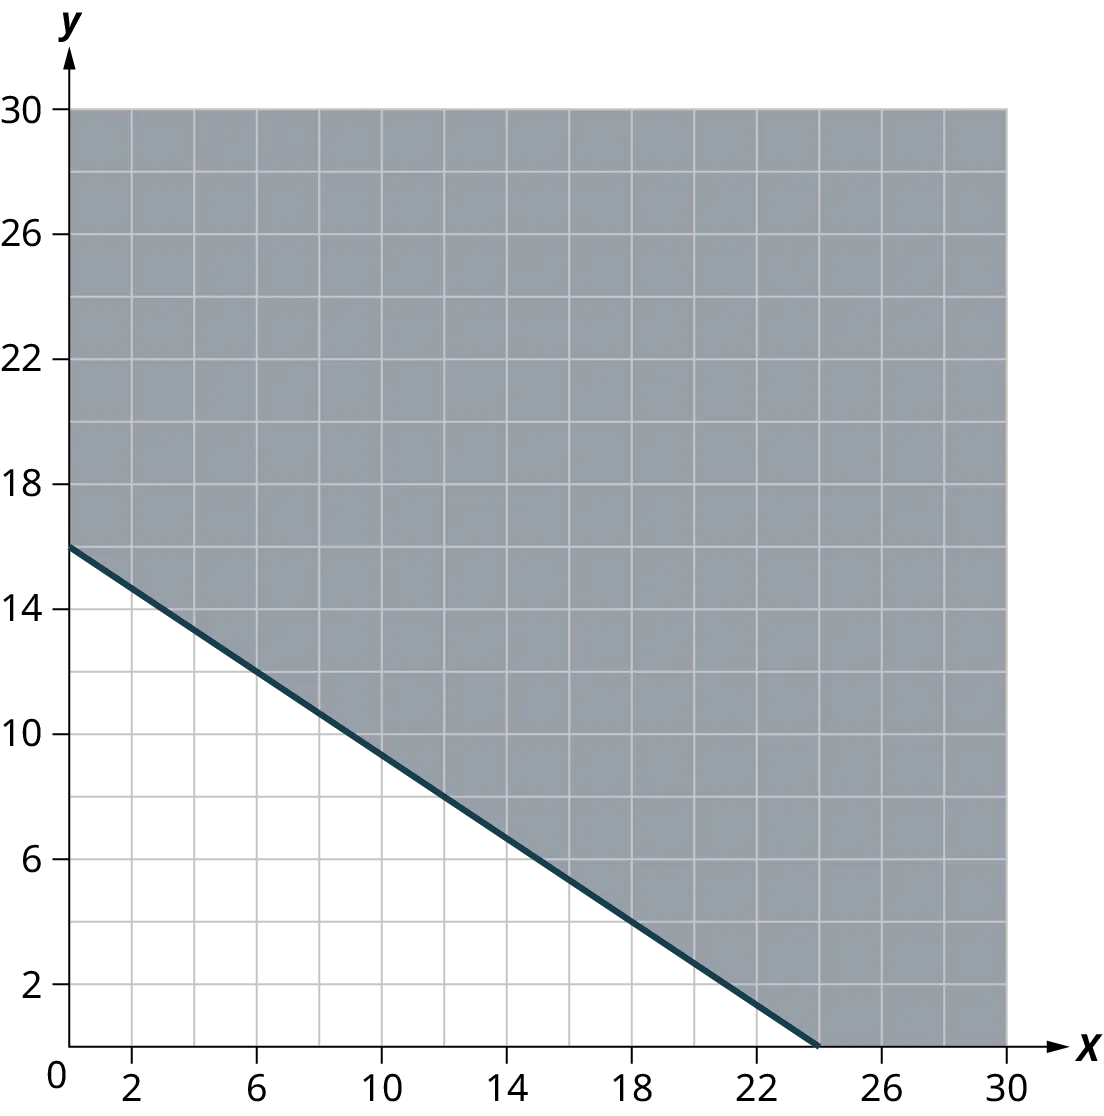 A line is plotted on an x y coordinate plane. The x-axis ranges from 0 to 30, in increments of 2. The y-axis ranges from 0 to 30, in increments of 2. The line passes through the following points, (0, 16), (6, 12), (12, 8), (18, 4), and (24, 0). The region above the line is shaded.